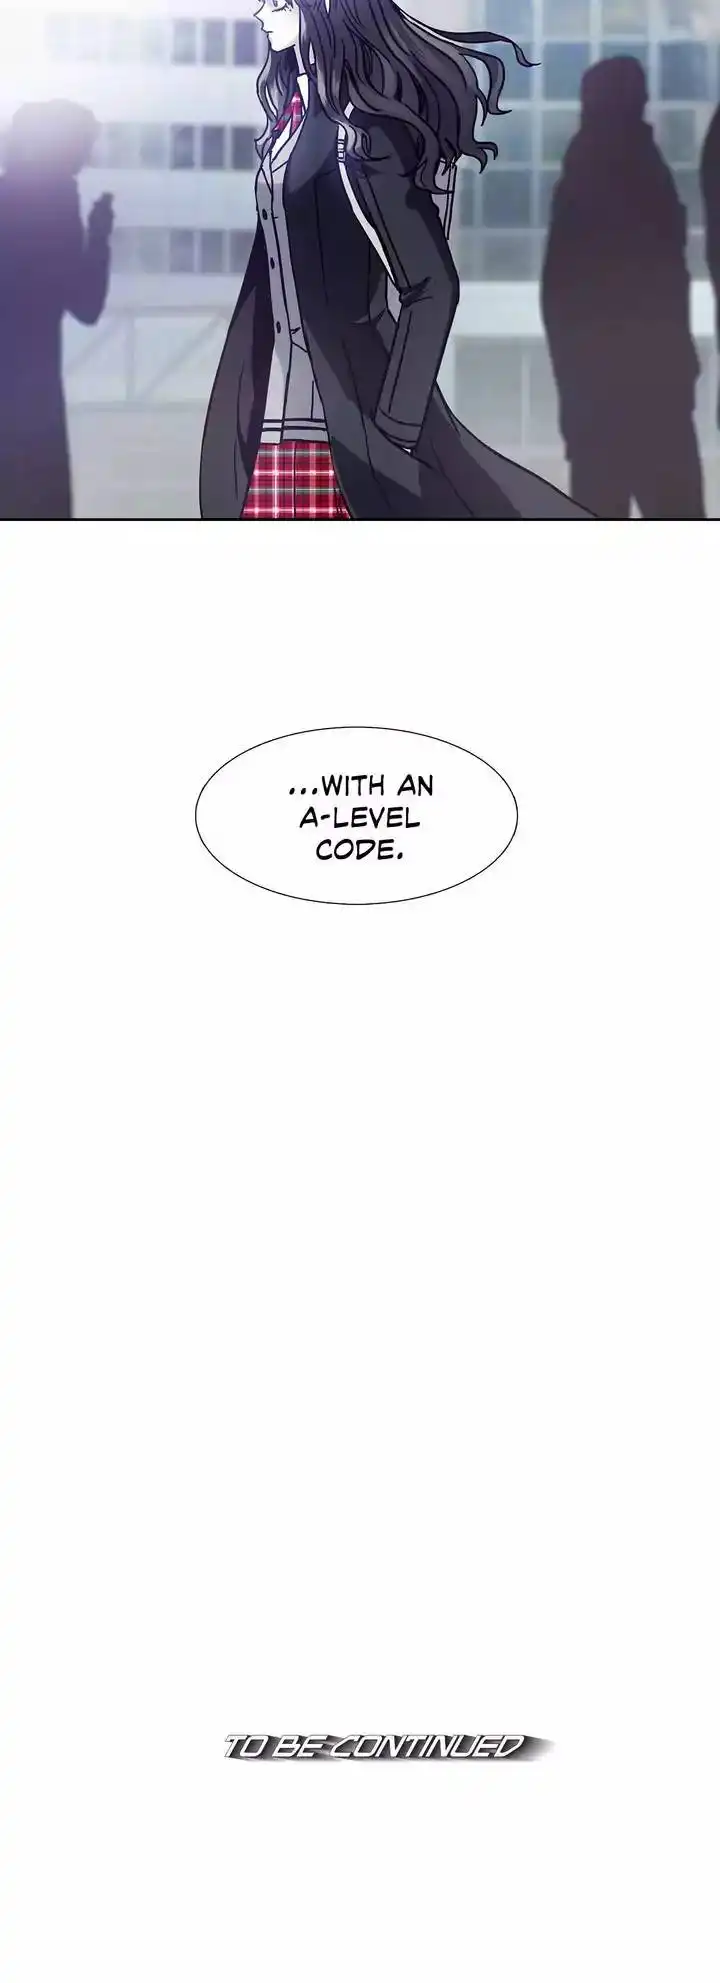 Unknown Code Chapter 48